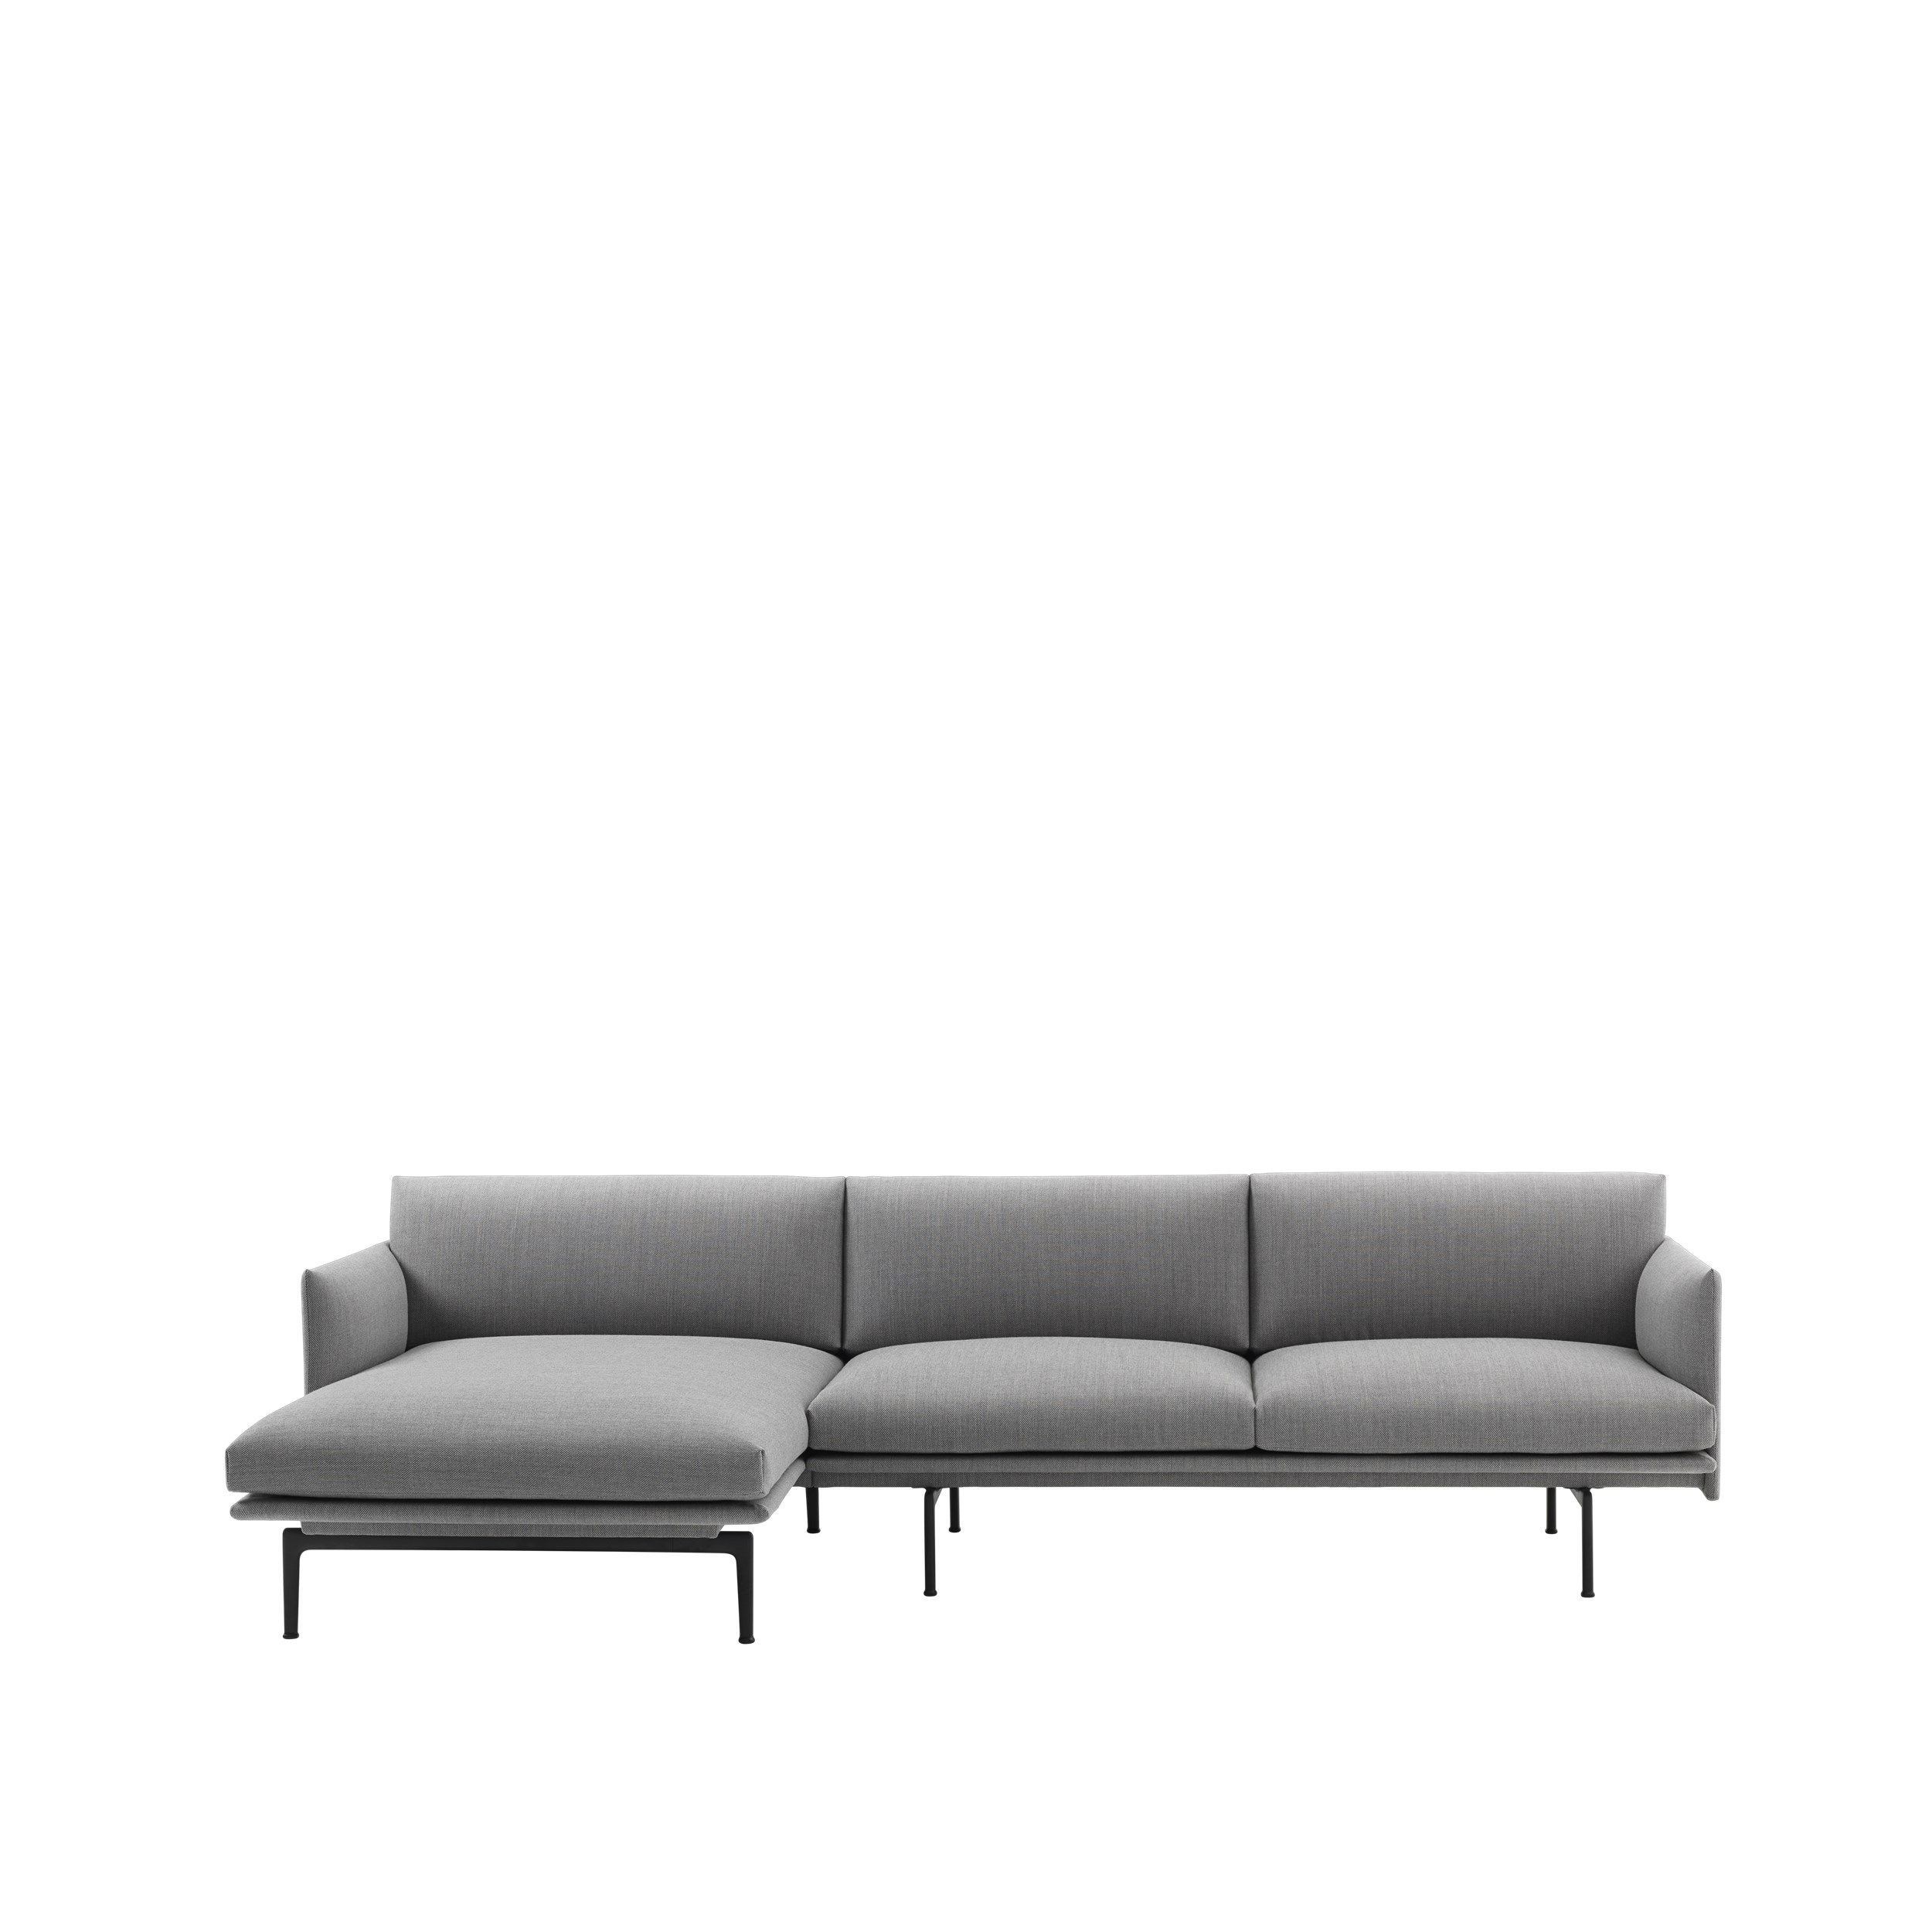 Outline Chaise Longue from € 3,995